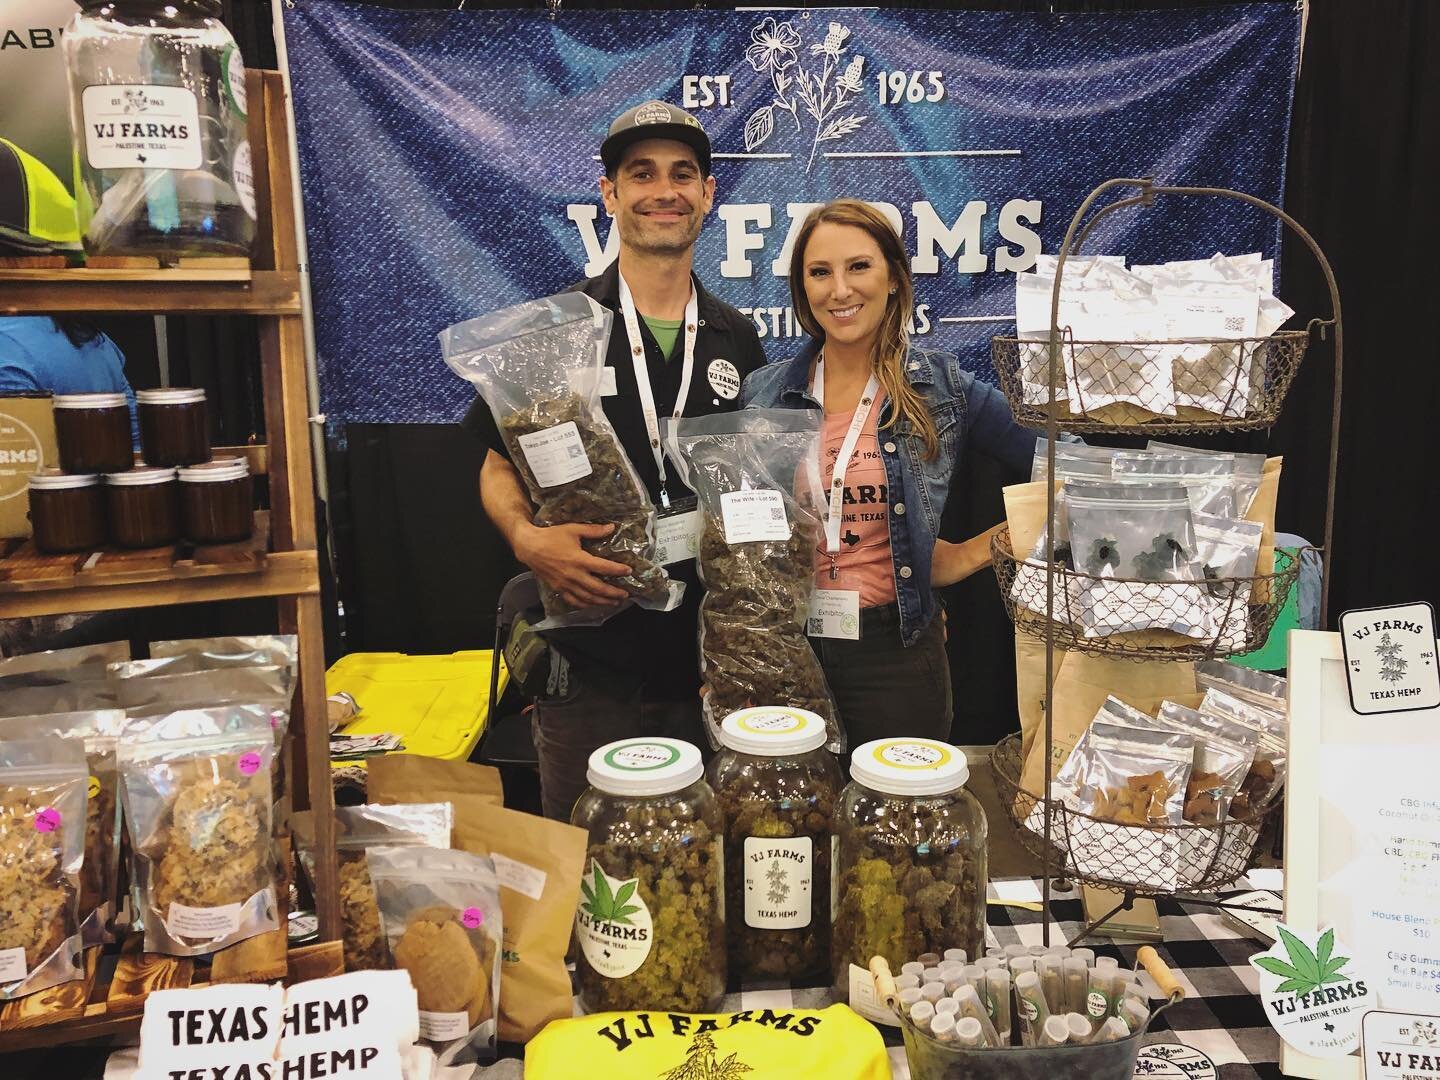 We&rsquo;ve had a great day at @luckyleafexpo 🌿🌿🌿 If you didn&rsquo;t get a chance to swing by yet, come see us tomorrow from 10-5. Free smells!! 😌😏
.
.
.
#luckyyou #luckyleaf #luckyleafexpo #dallas #gotexan #texashemp #hemp #hempexpo #cannabisc